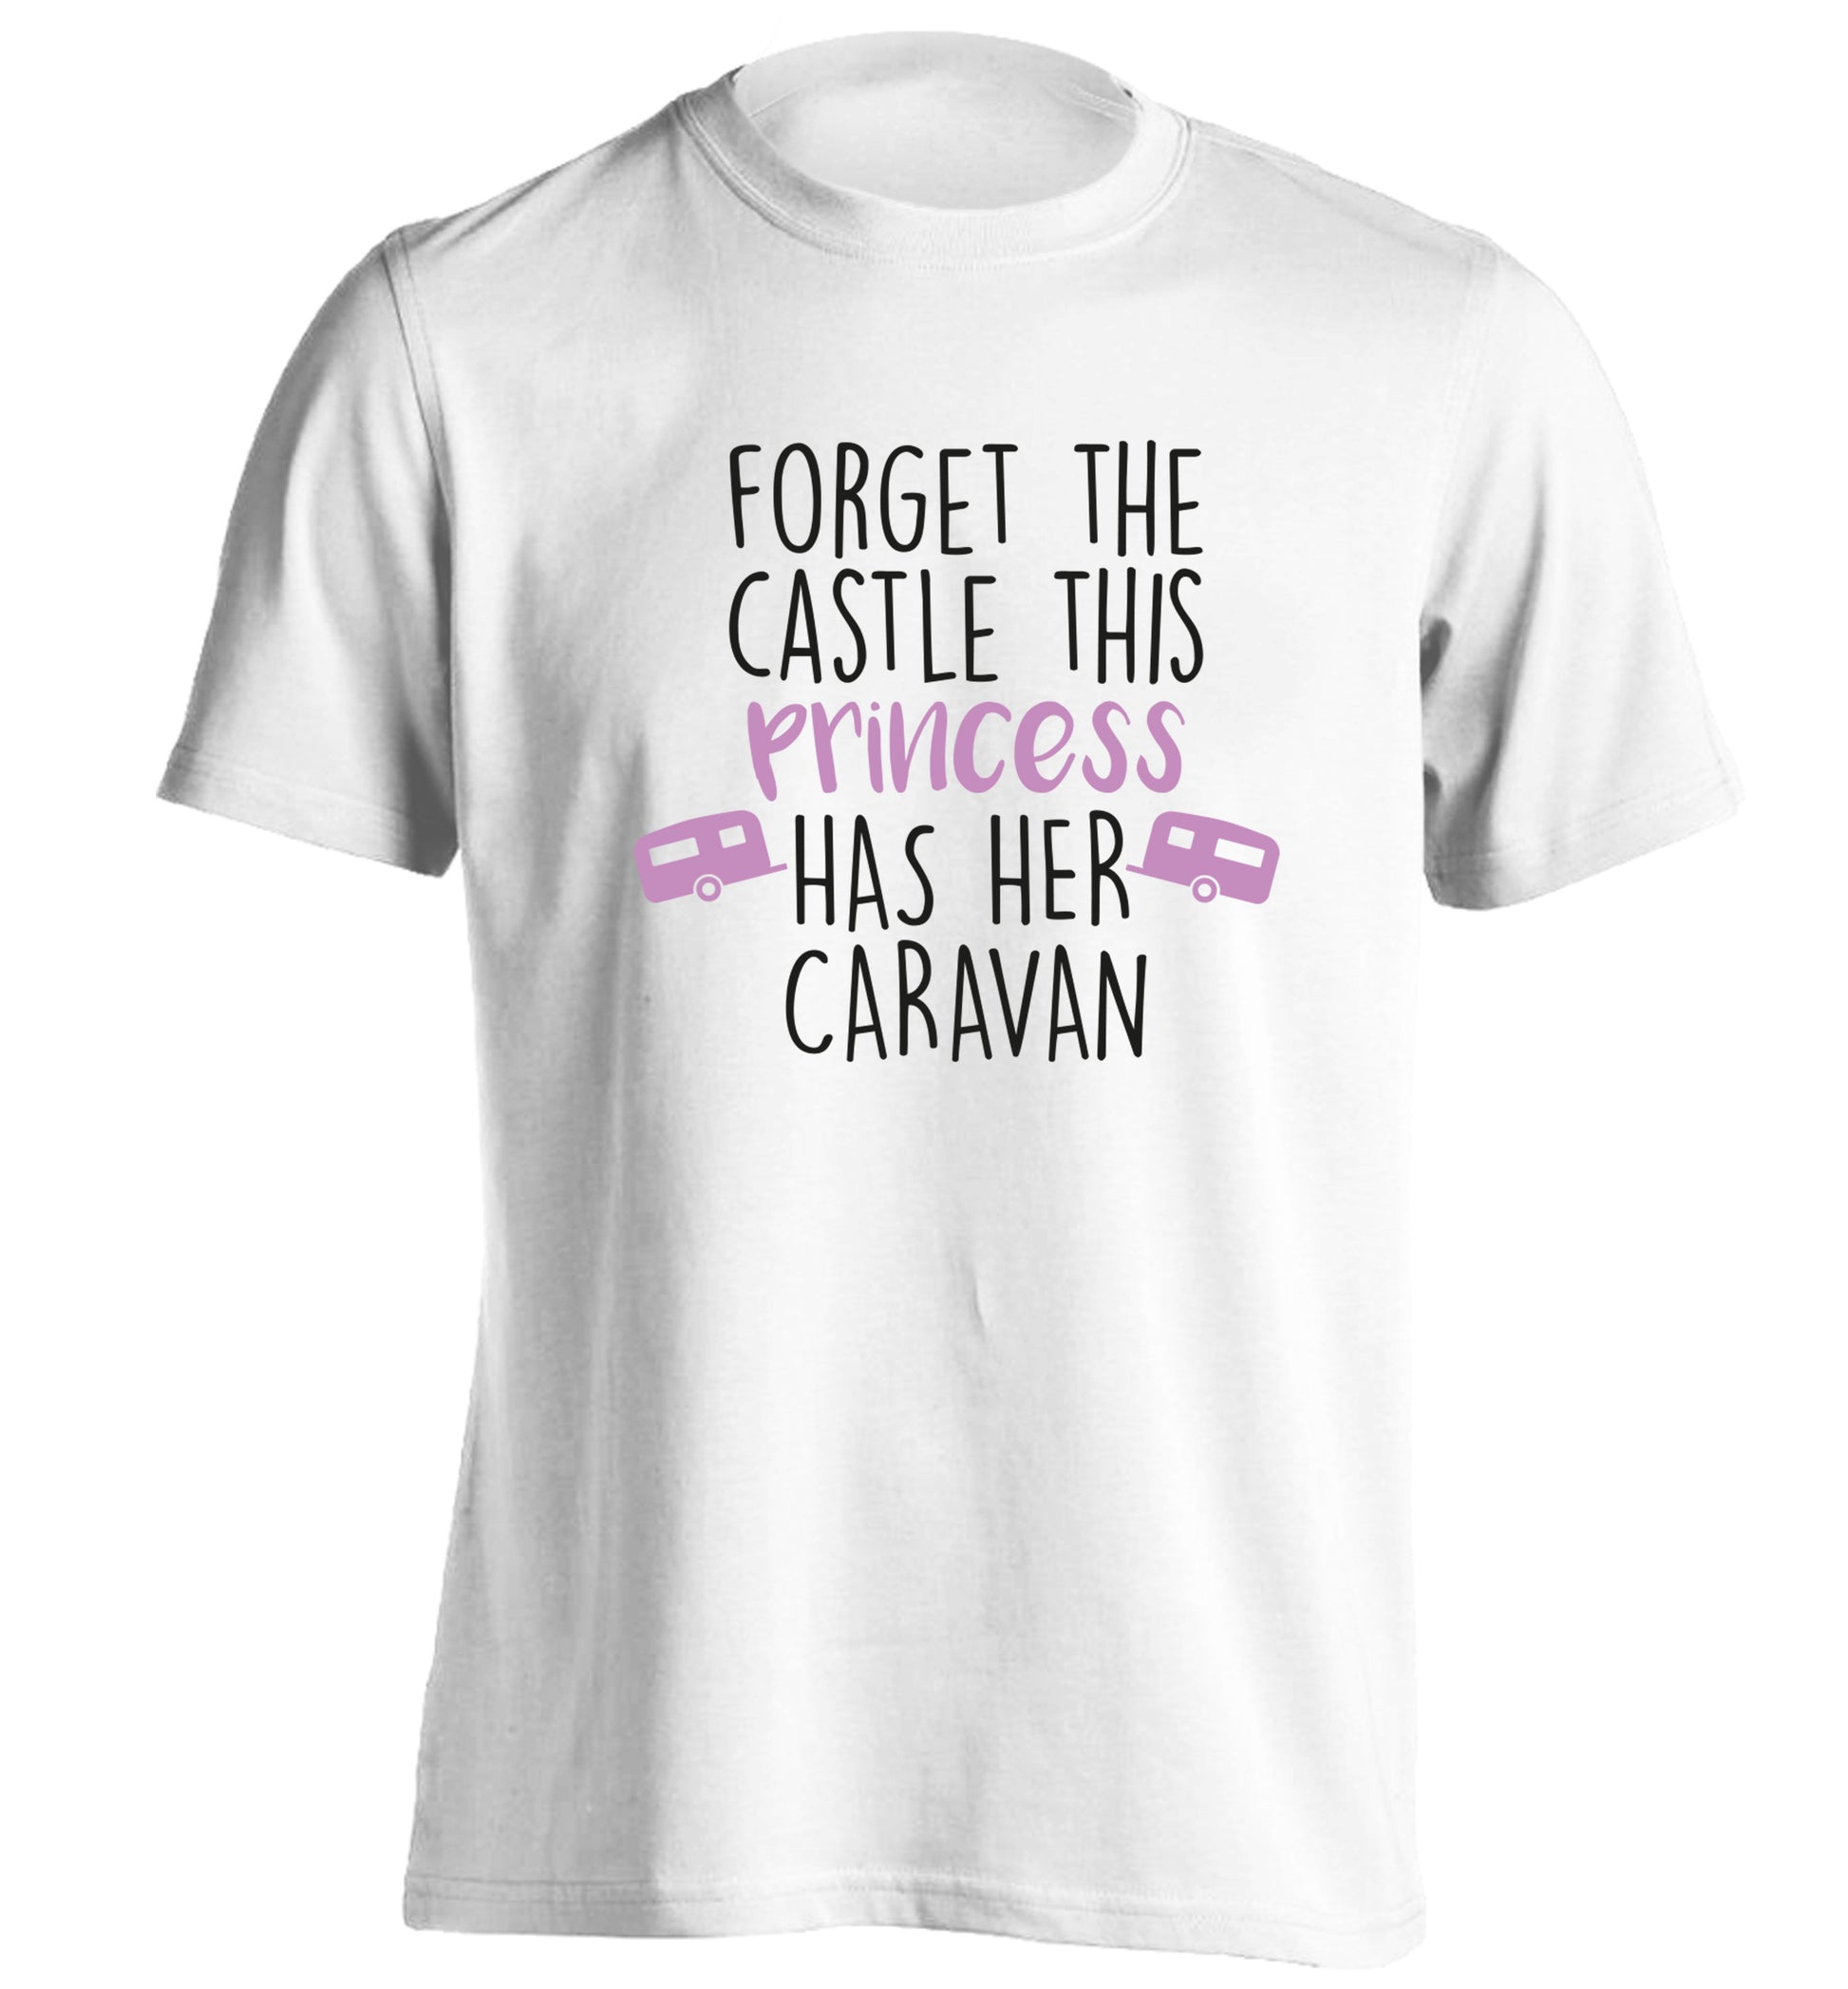 Forget the castle this princess lives at the caravan adults unisex white Tshirt 2XL